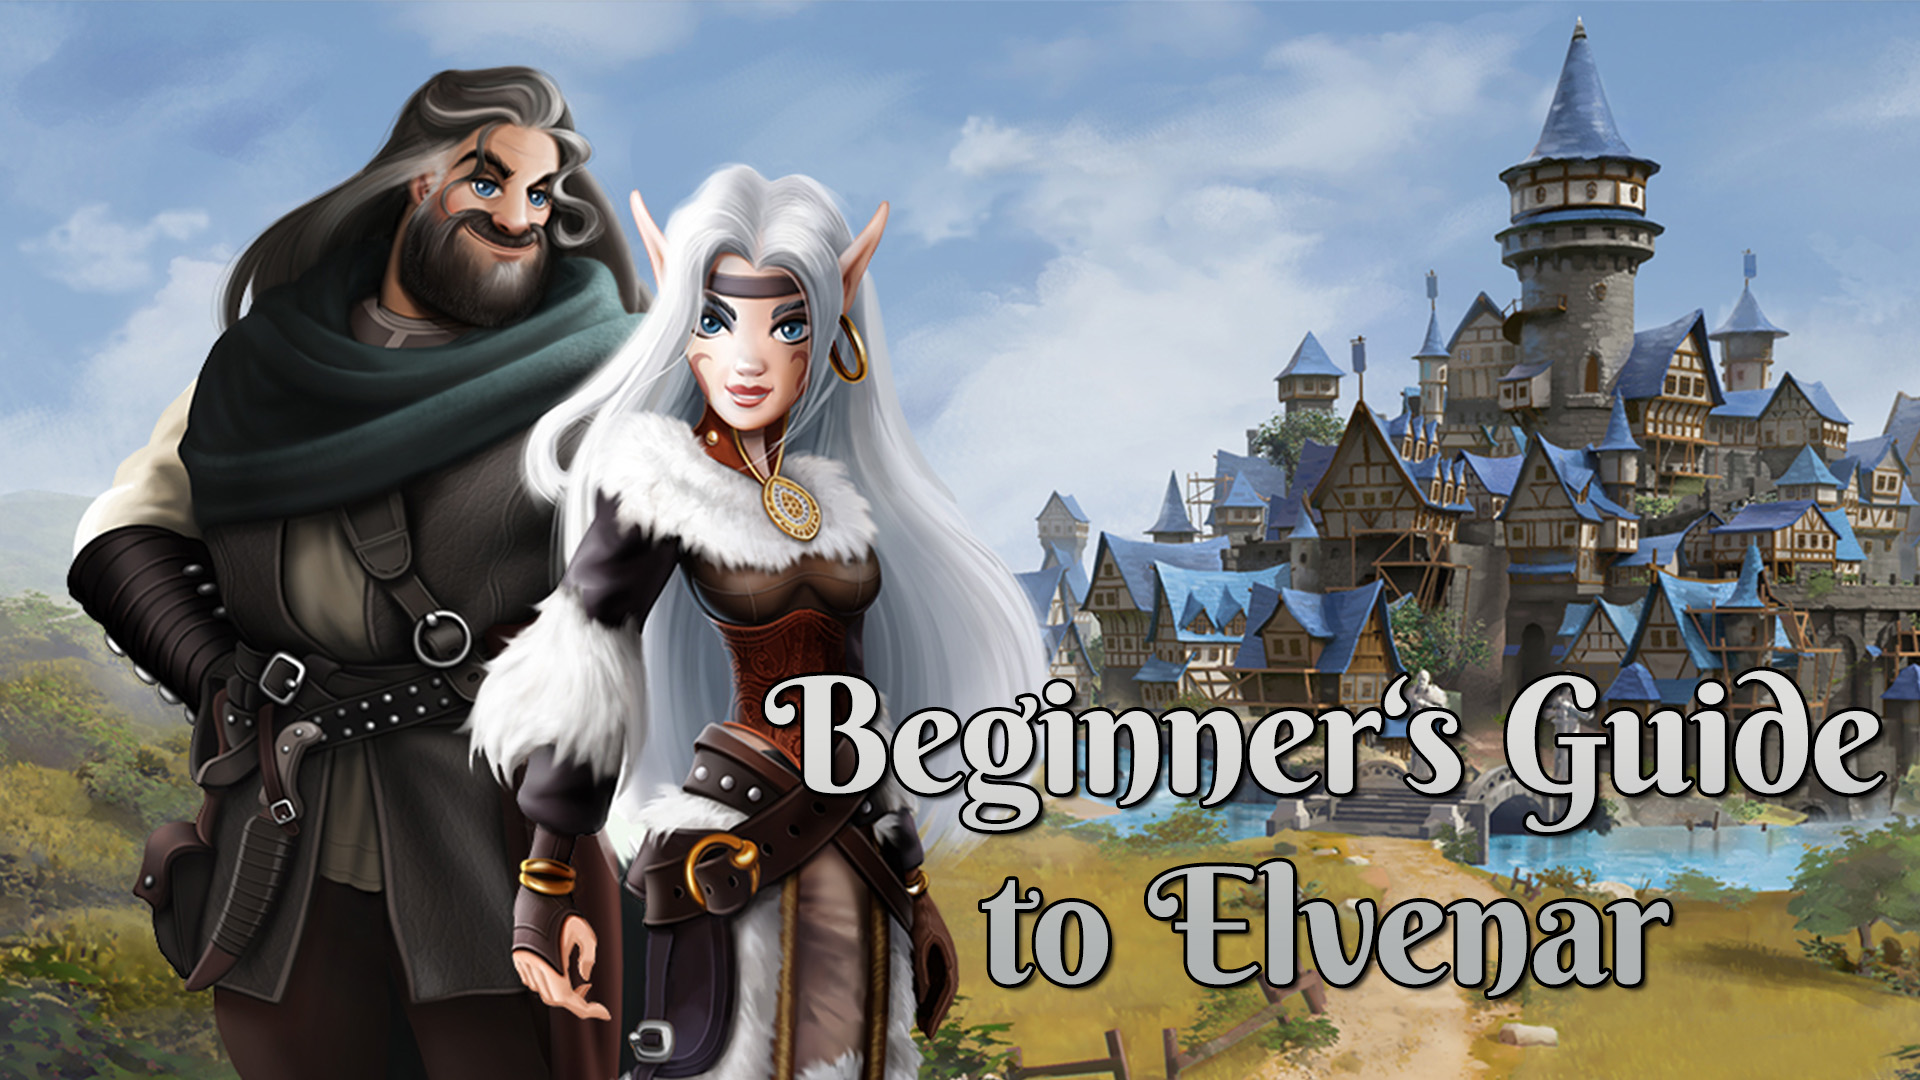 Embark on Your Elvenar Adventure: A Quick Guide for Newcomers